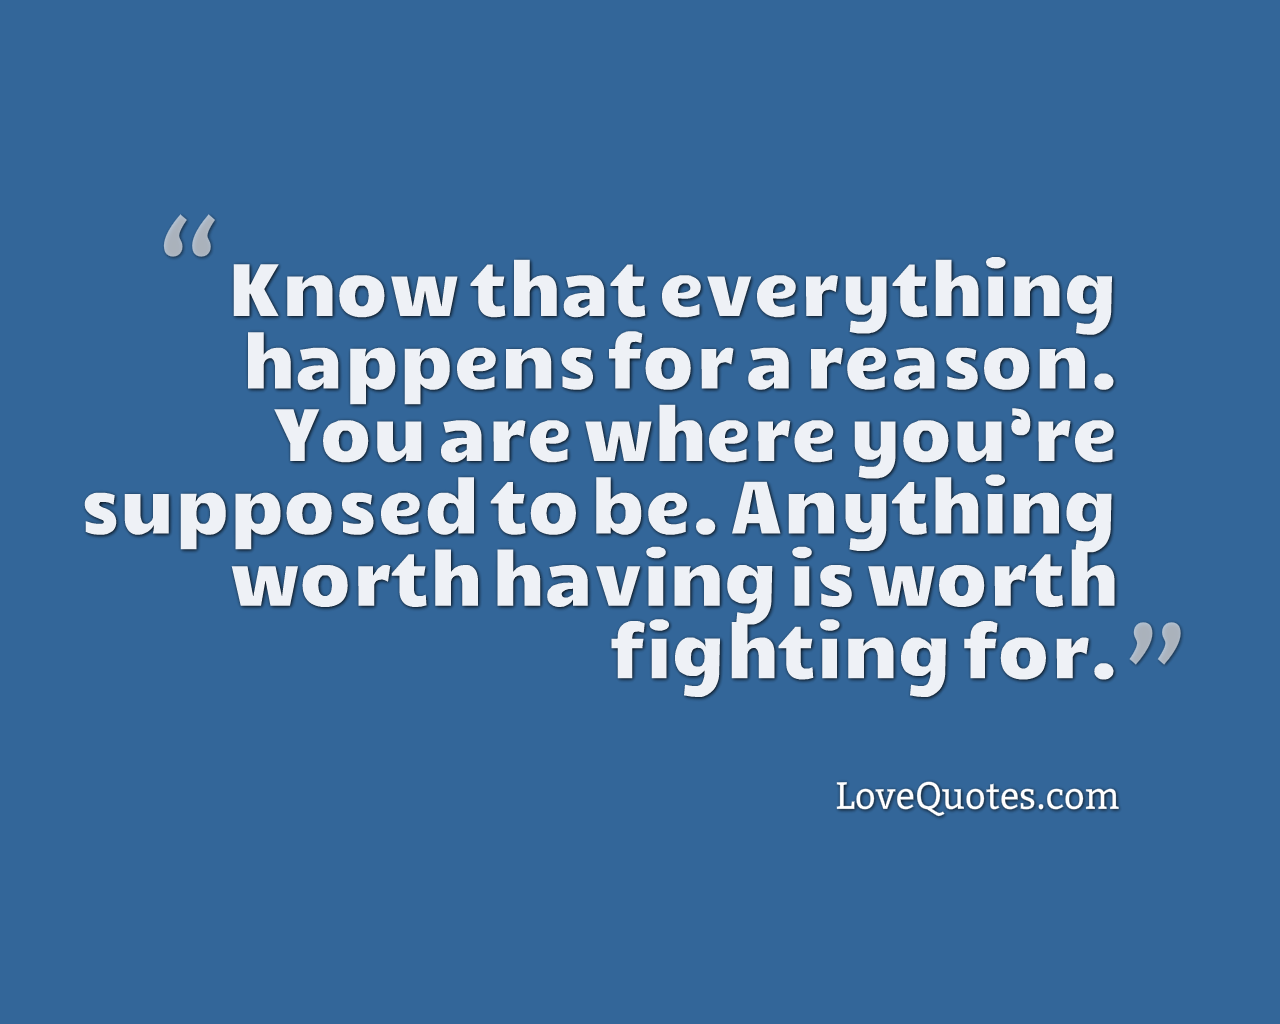 Worth Fighting For